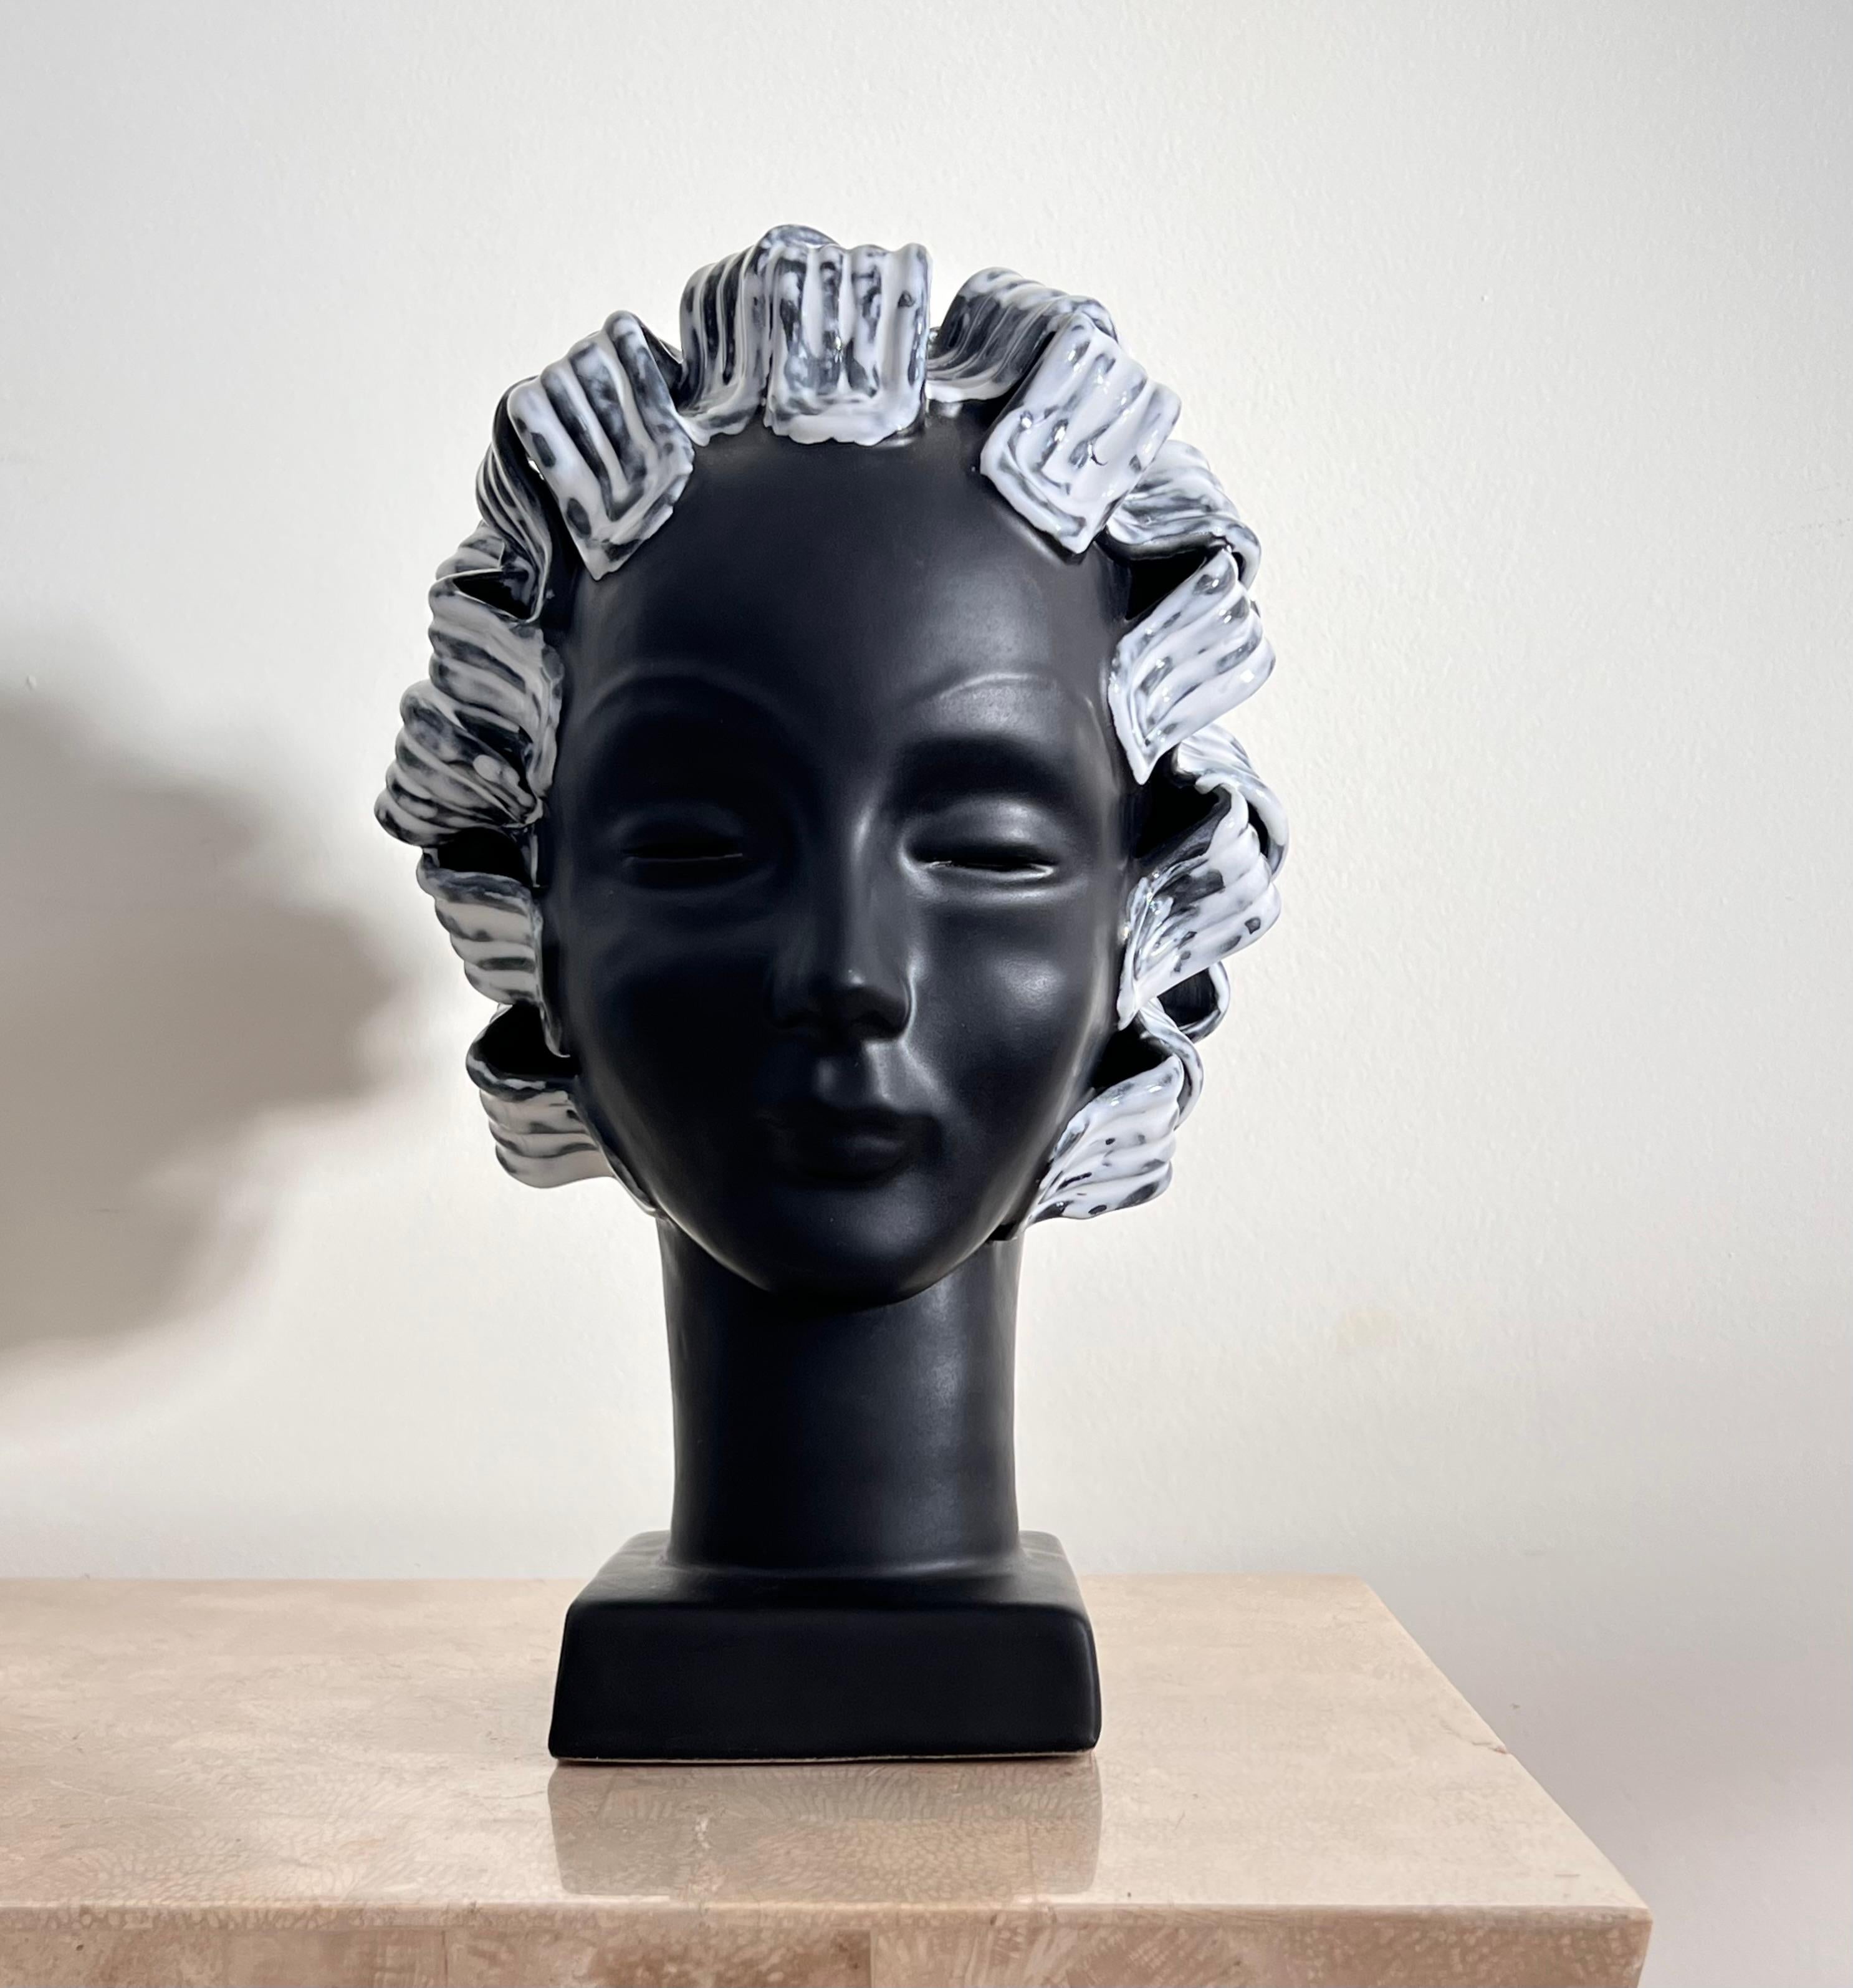 The porcelain bust of a woman, late 20th century. Featuring ribbon-like hair of glazed ceramic - reminiscent of a contemporary vision of Medusa. Minor signs of age shown in photos. 

7” W x 8” D x 11.75” H.